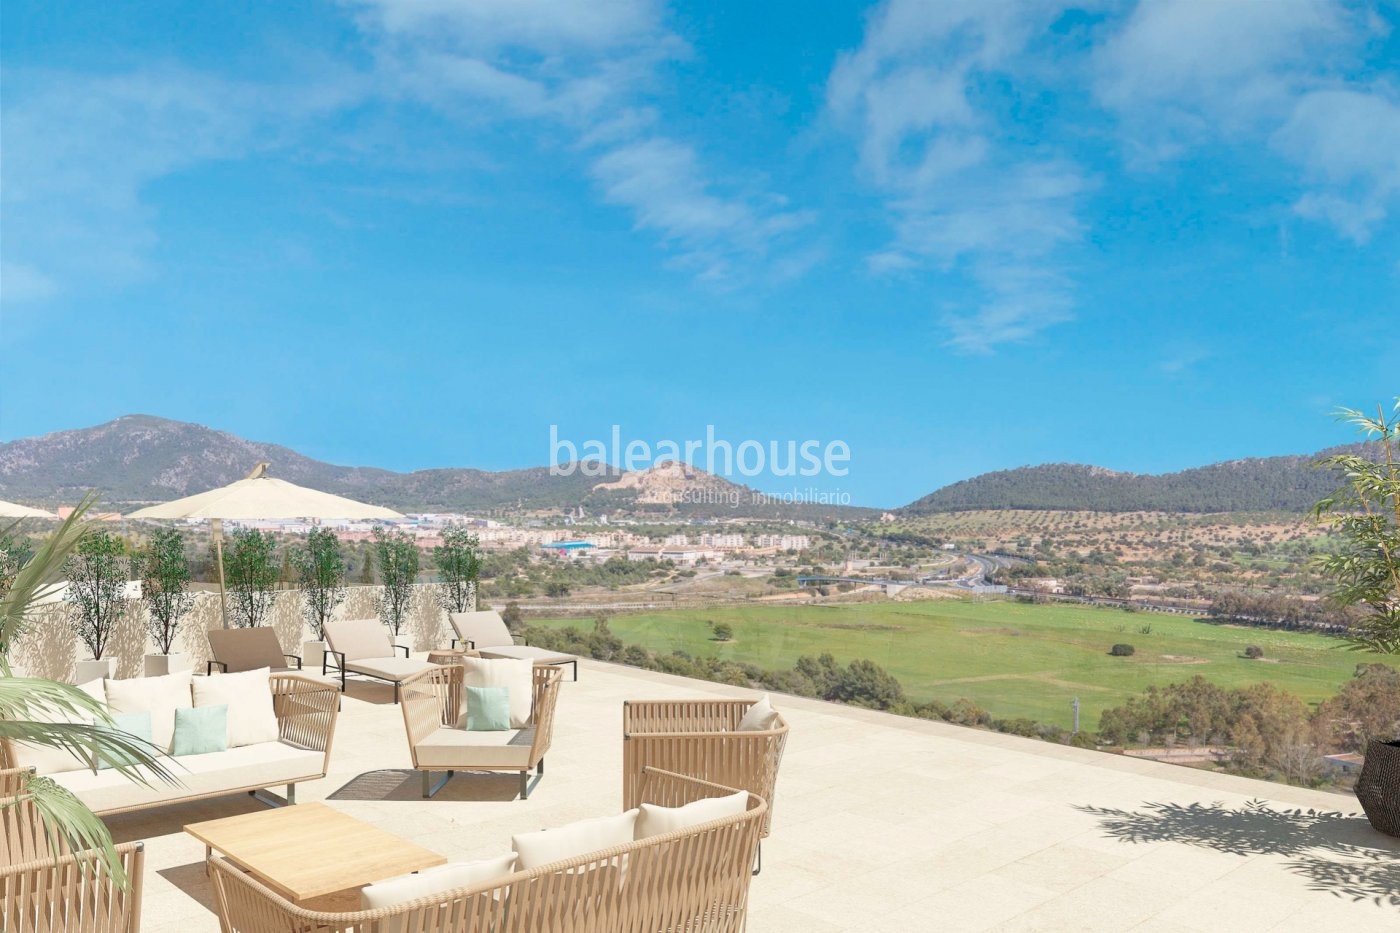 Modern new homes in Santa Ponsa with terraces, garden, swimming pool and unobstructed views.